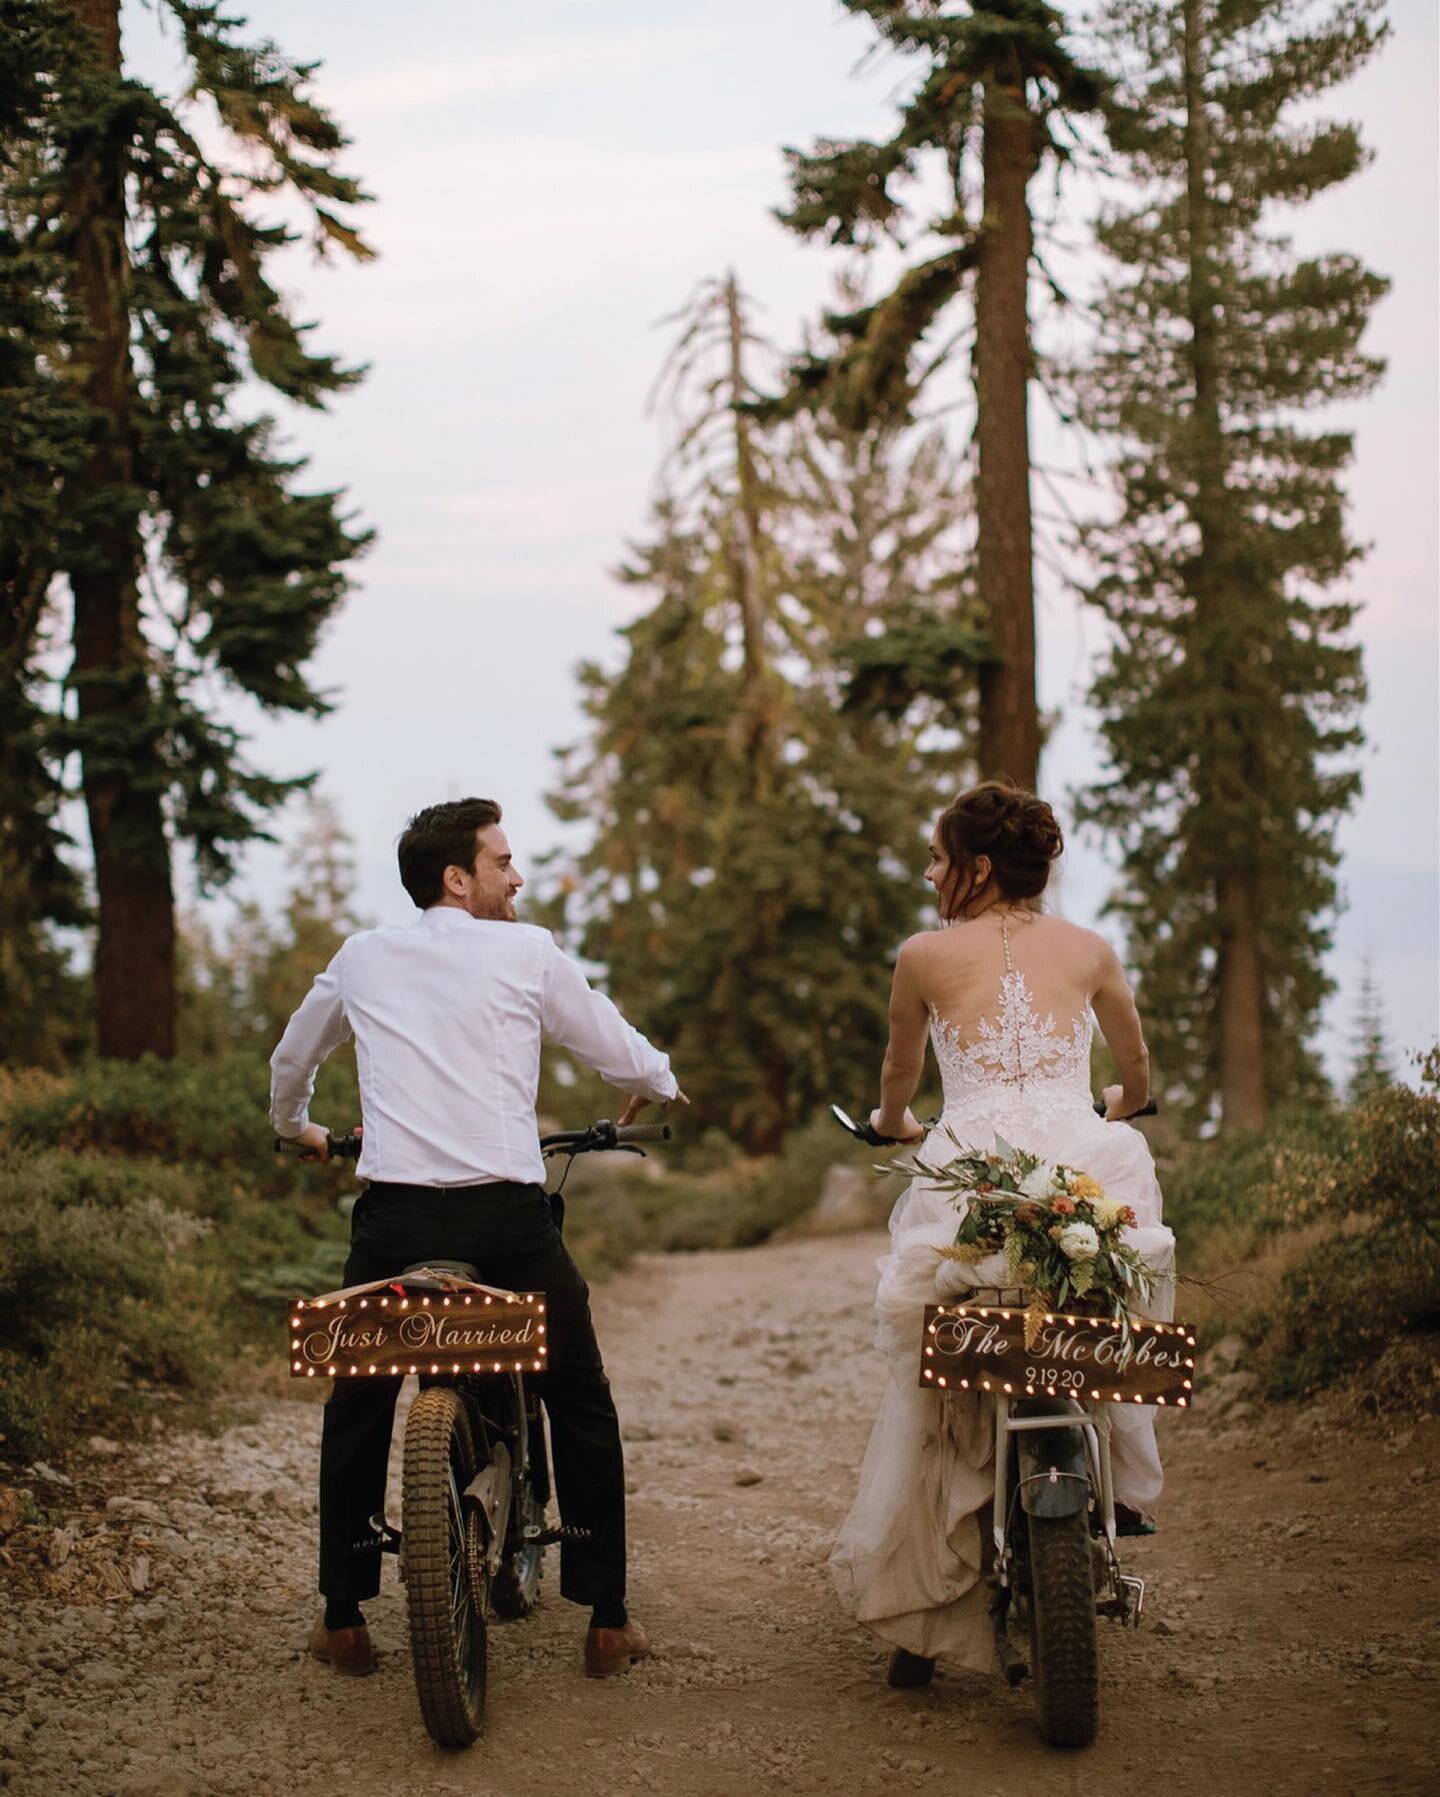 Weeks before Jenna &amp; Hugh were set to get married, the forest was shut down due to an unprecedented wildfire season. At this point, the forest had never shut down like this in my entire life. It was a completely new experience that we had to navi